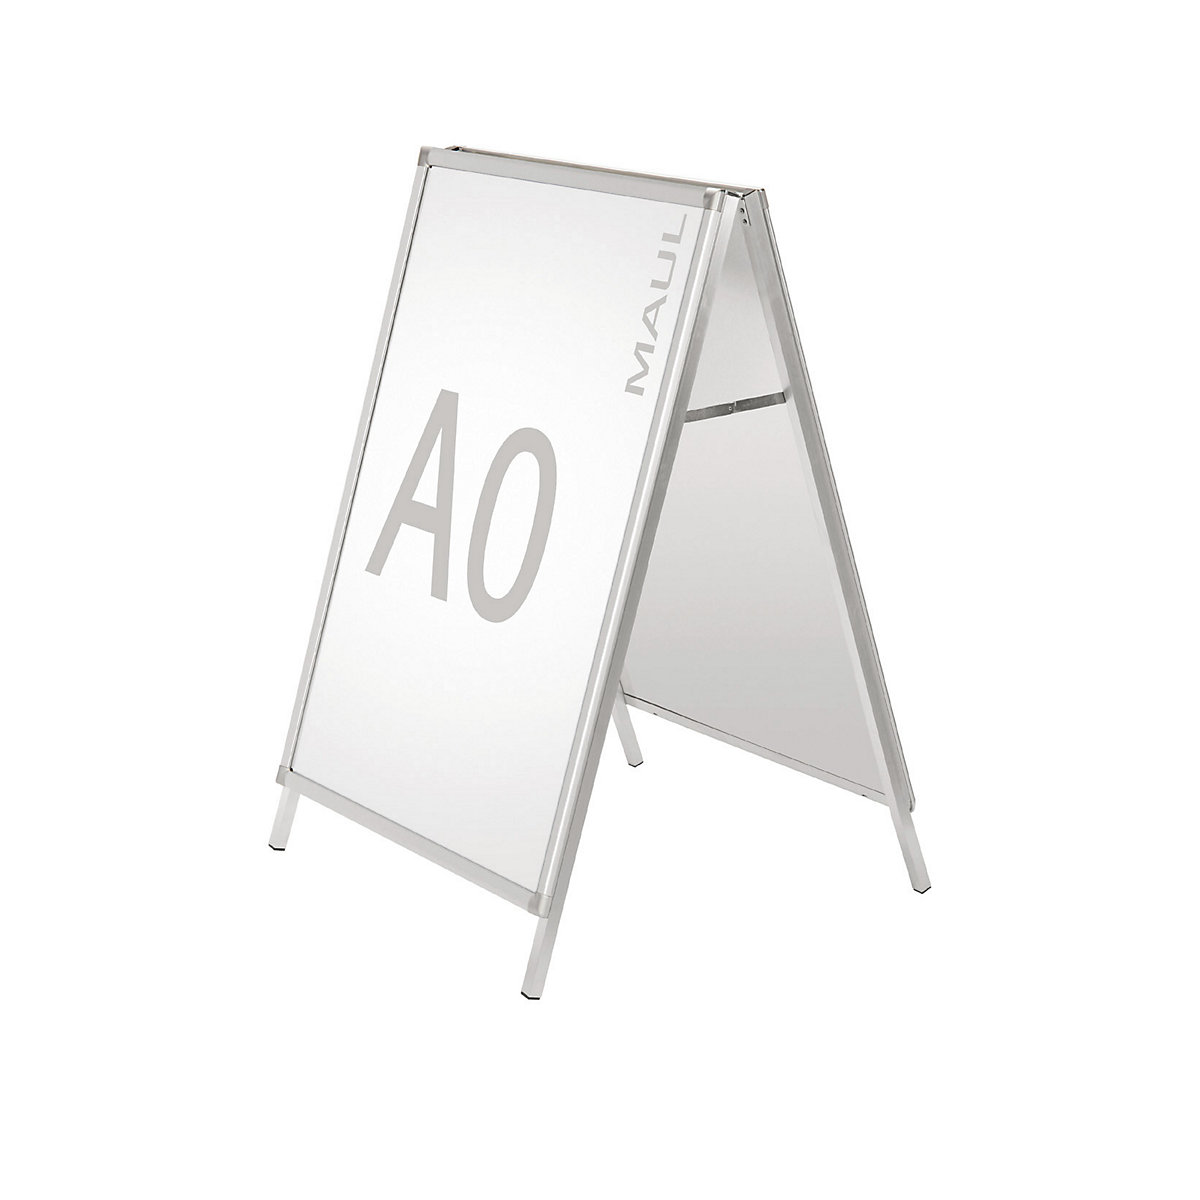 Display stand, double sided – MAUL, aluminium, weatherproof, for A0-3